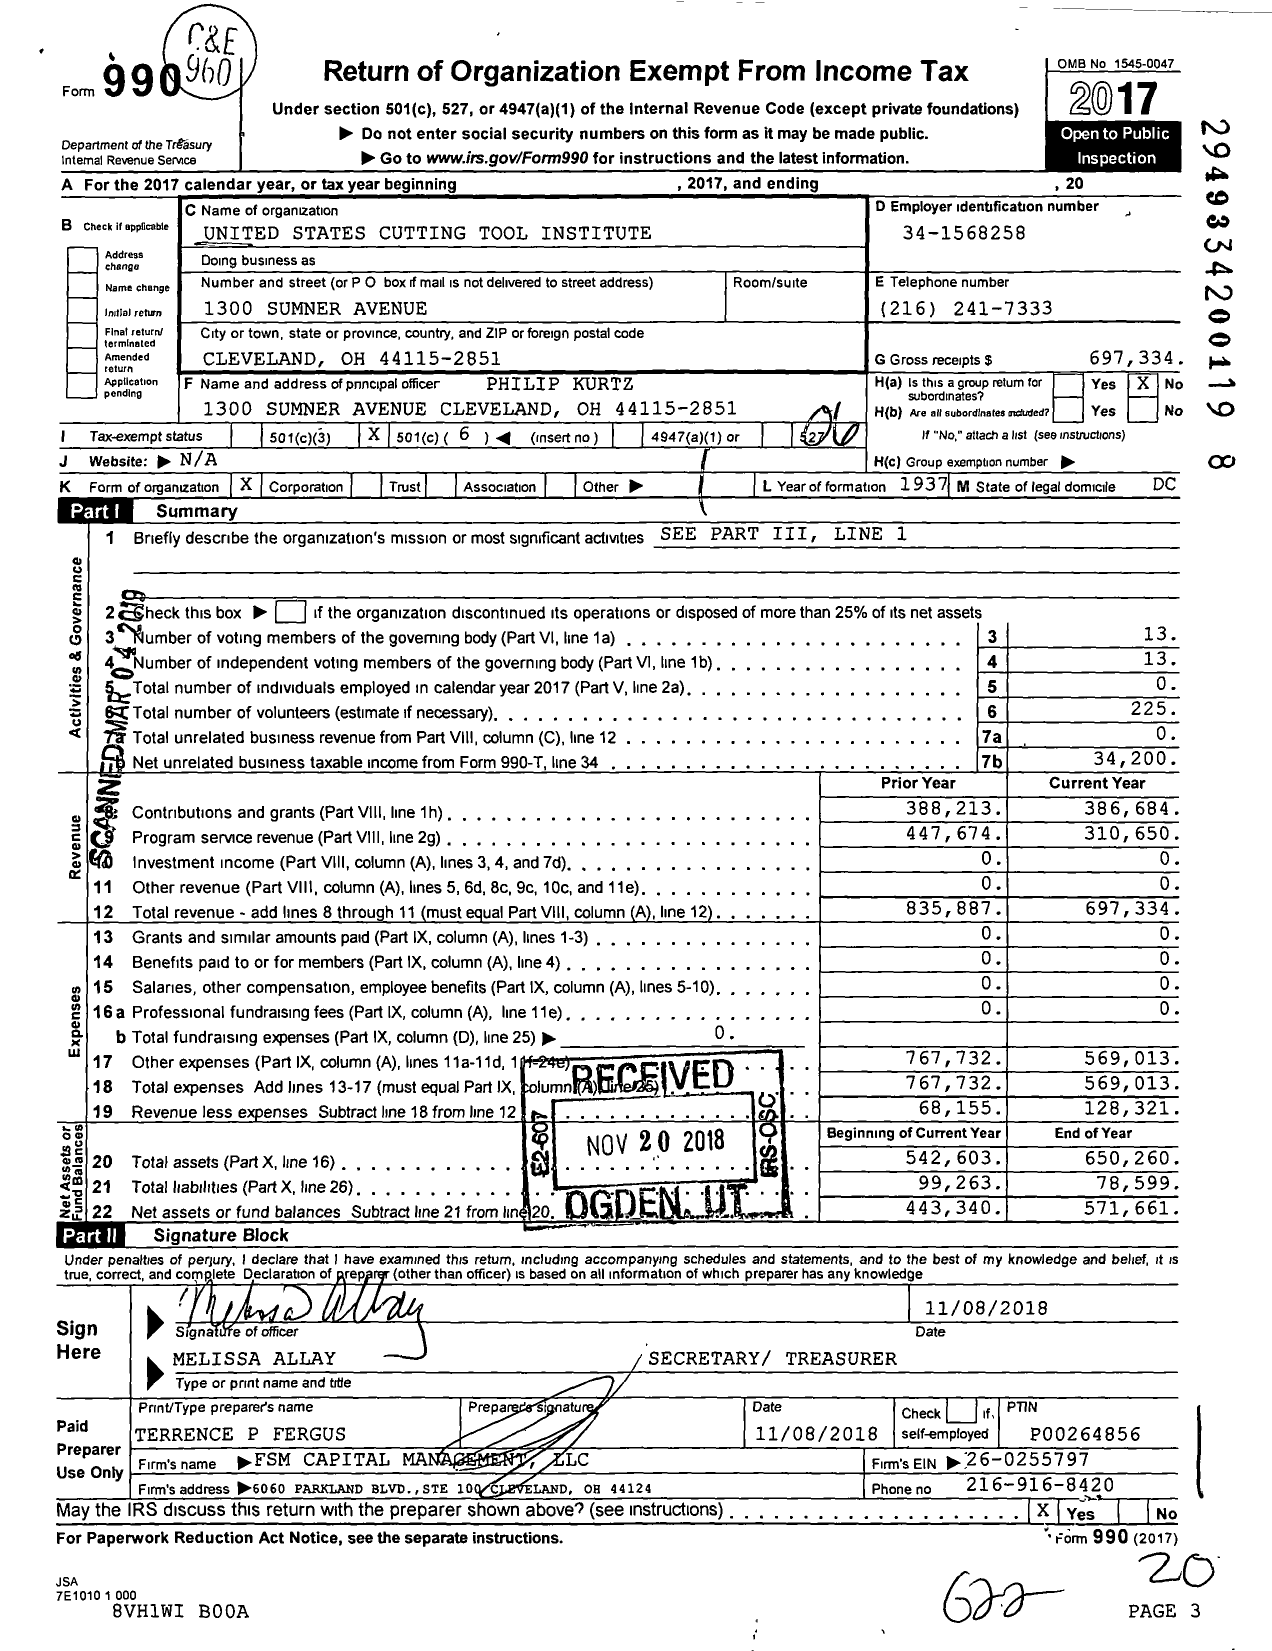 Image of first page of 2017 Form 990O for United States Cutting Tool Institute